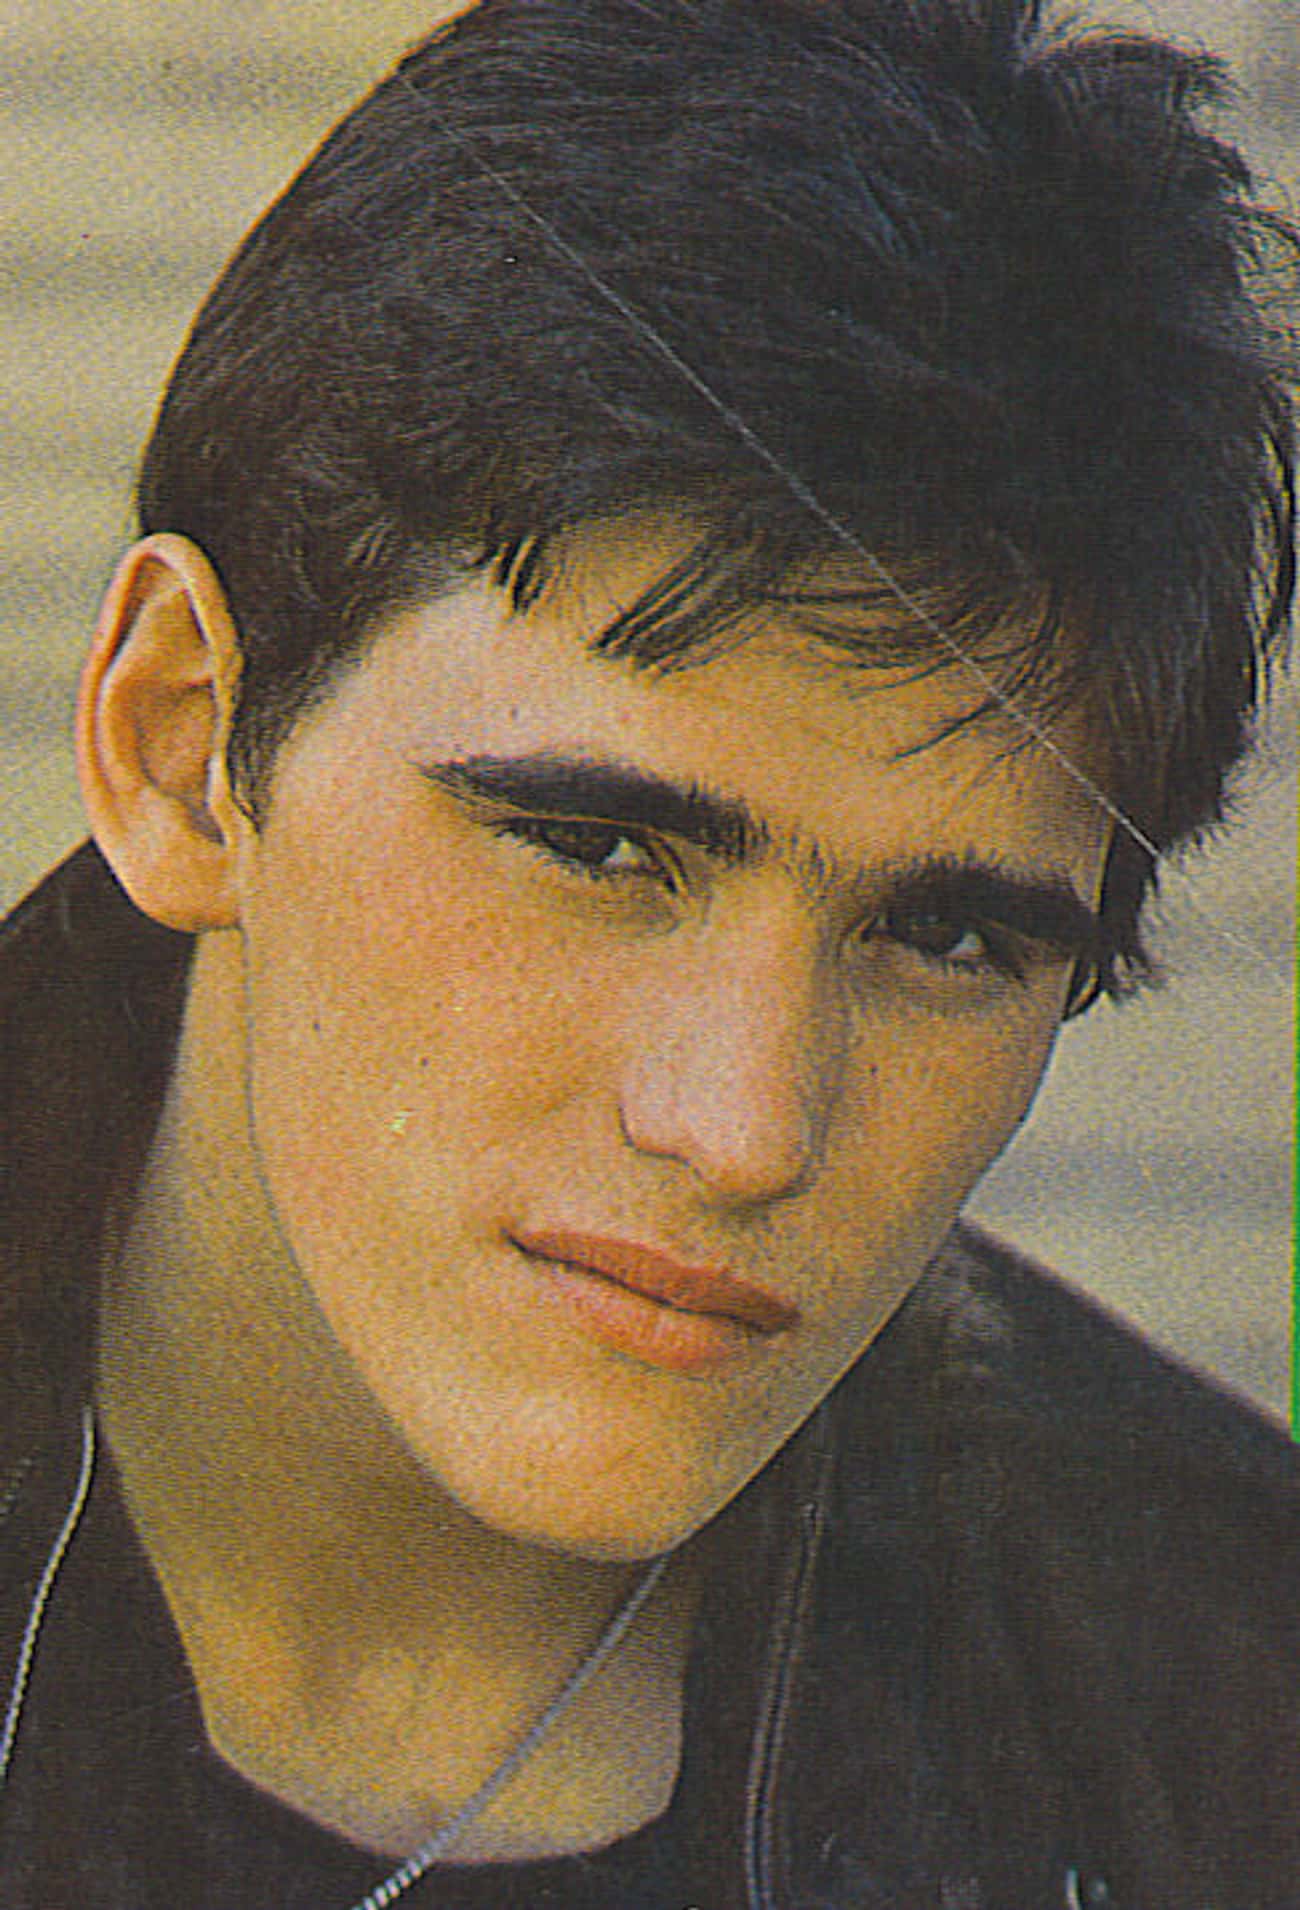 Young Matt Dillon in Black Leather Jacket